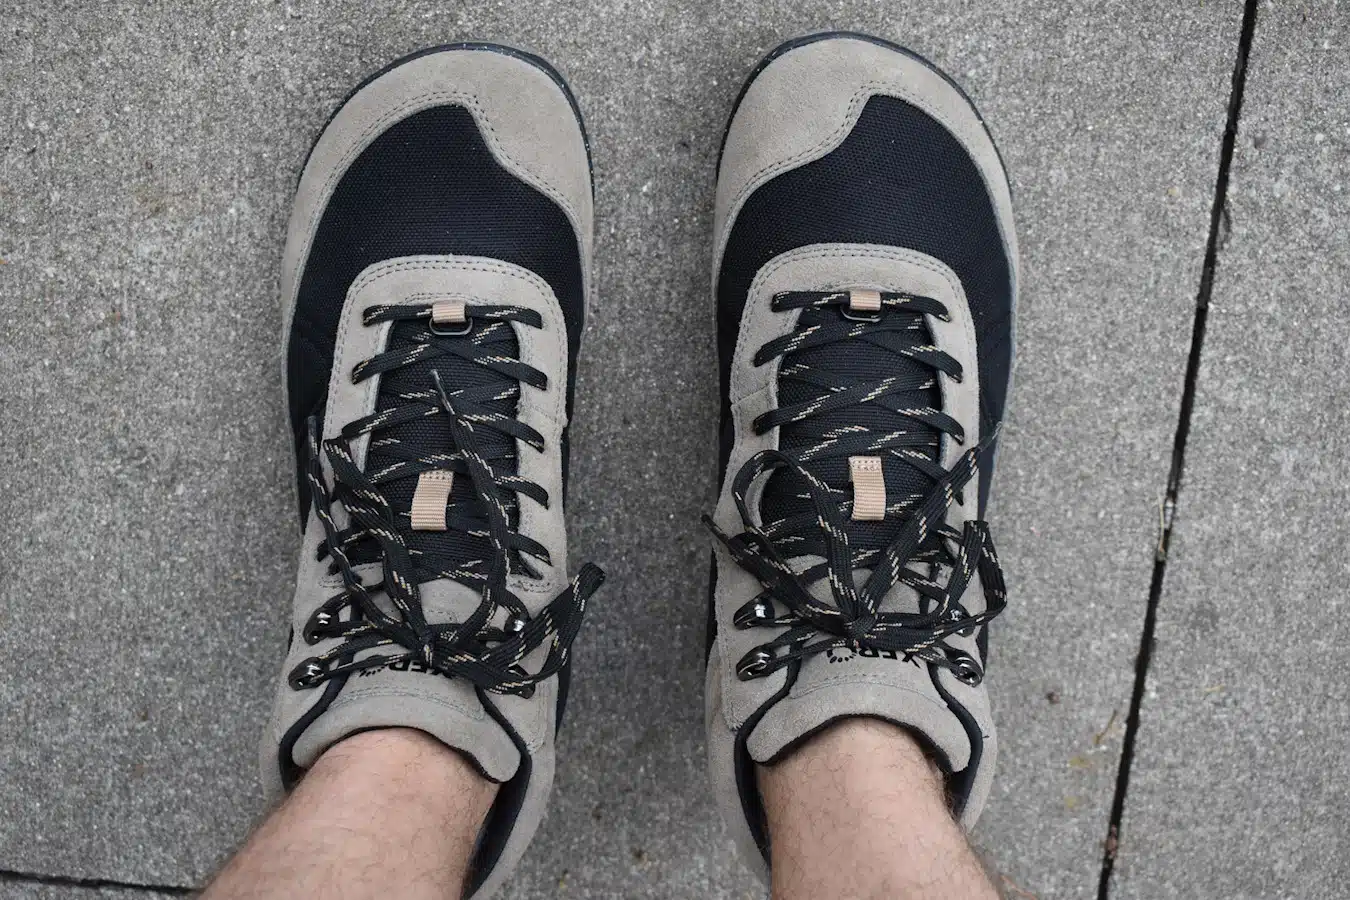 Xero Shoes Review: Barefoot and Looking Good - The Modest Man